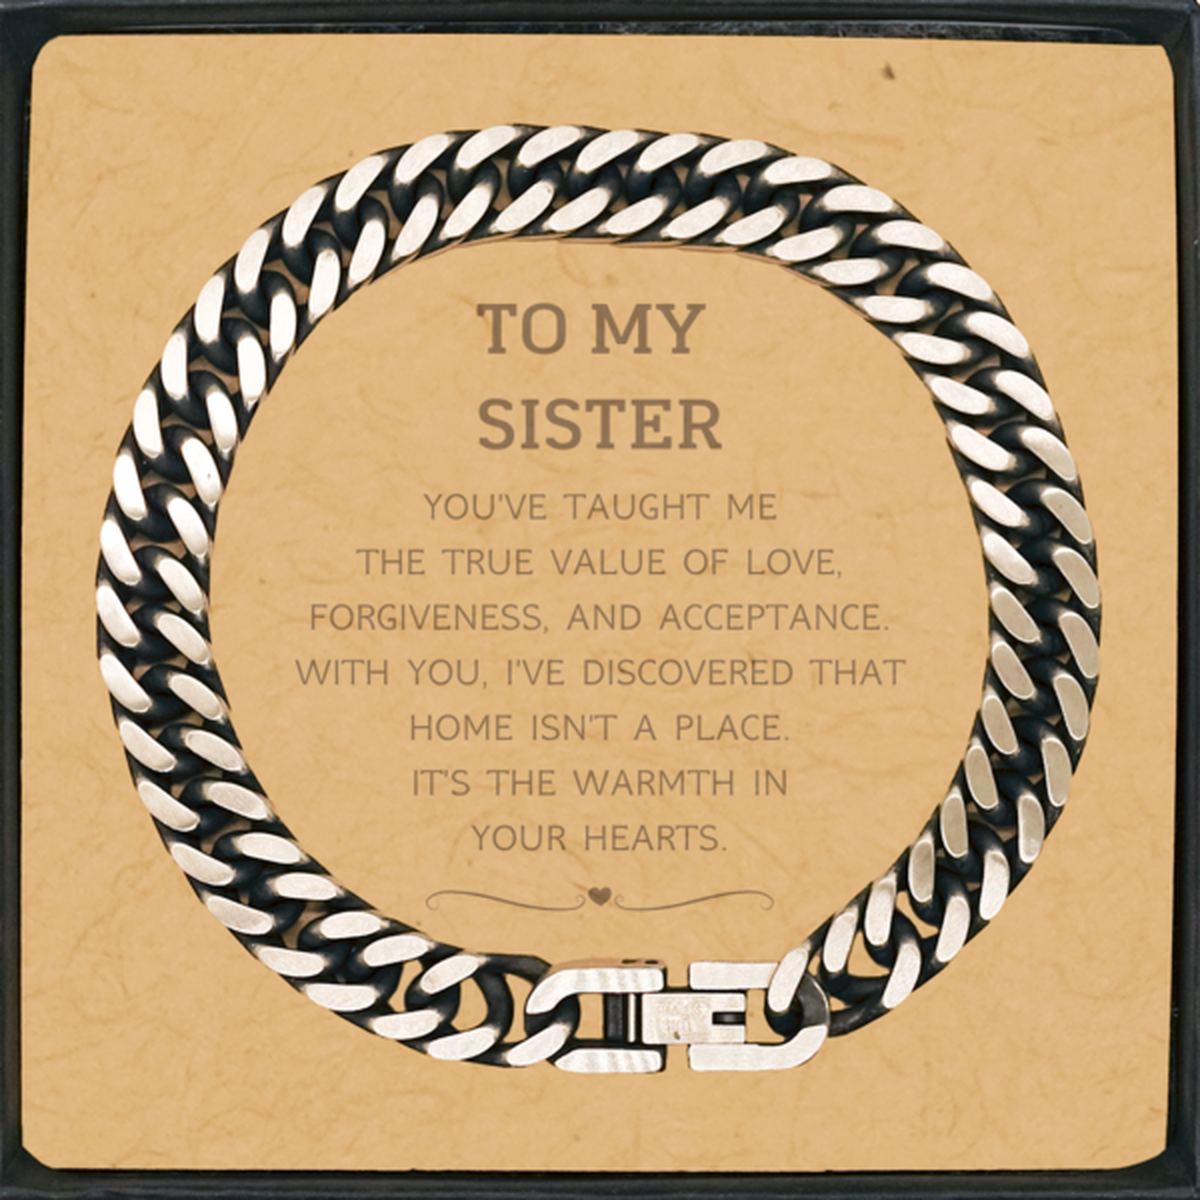 To My Sister Gifts, You've taught me the true value of love, Thank You Gifts For Sister, Birthday Cuban Link Chain Bracelet For Sister